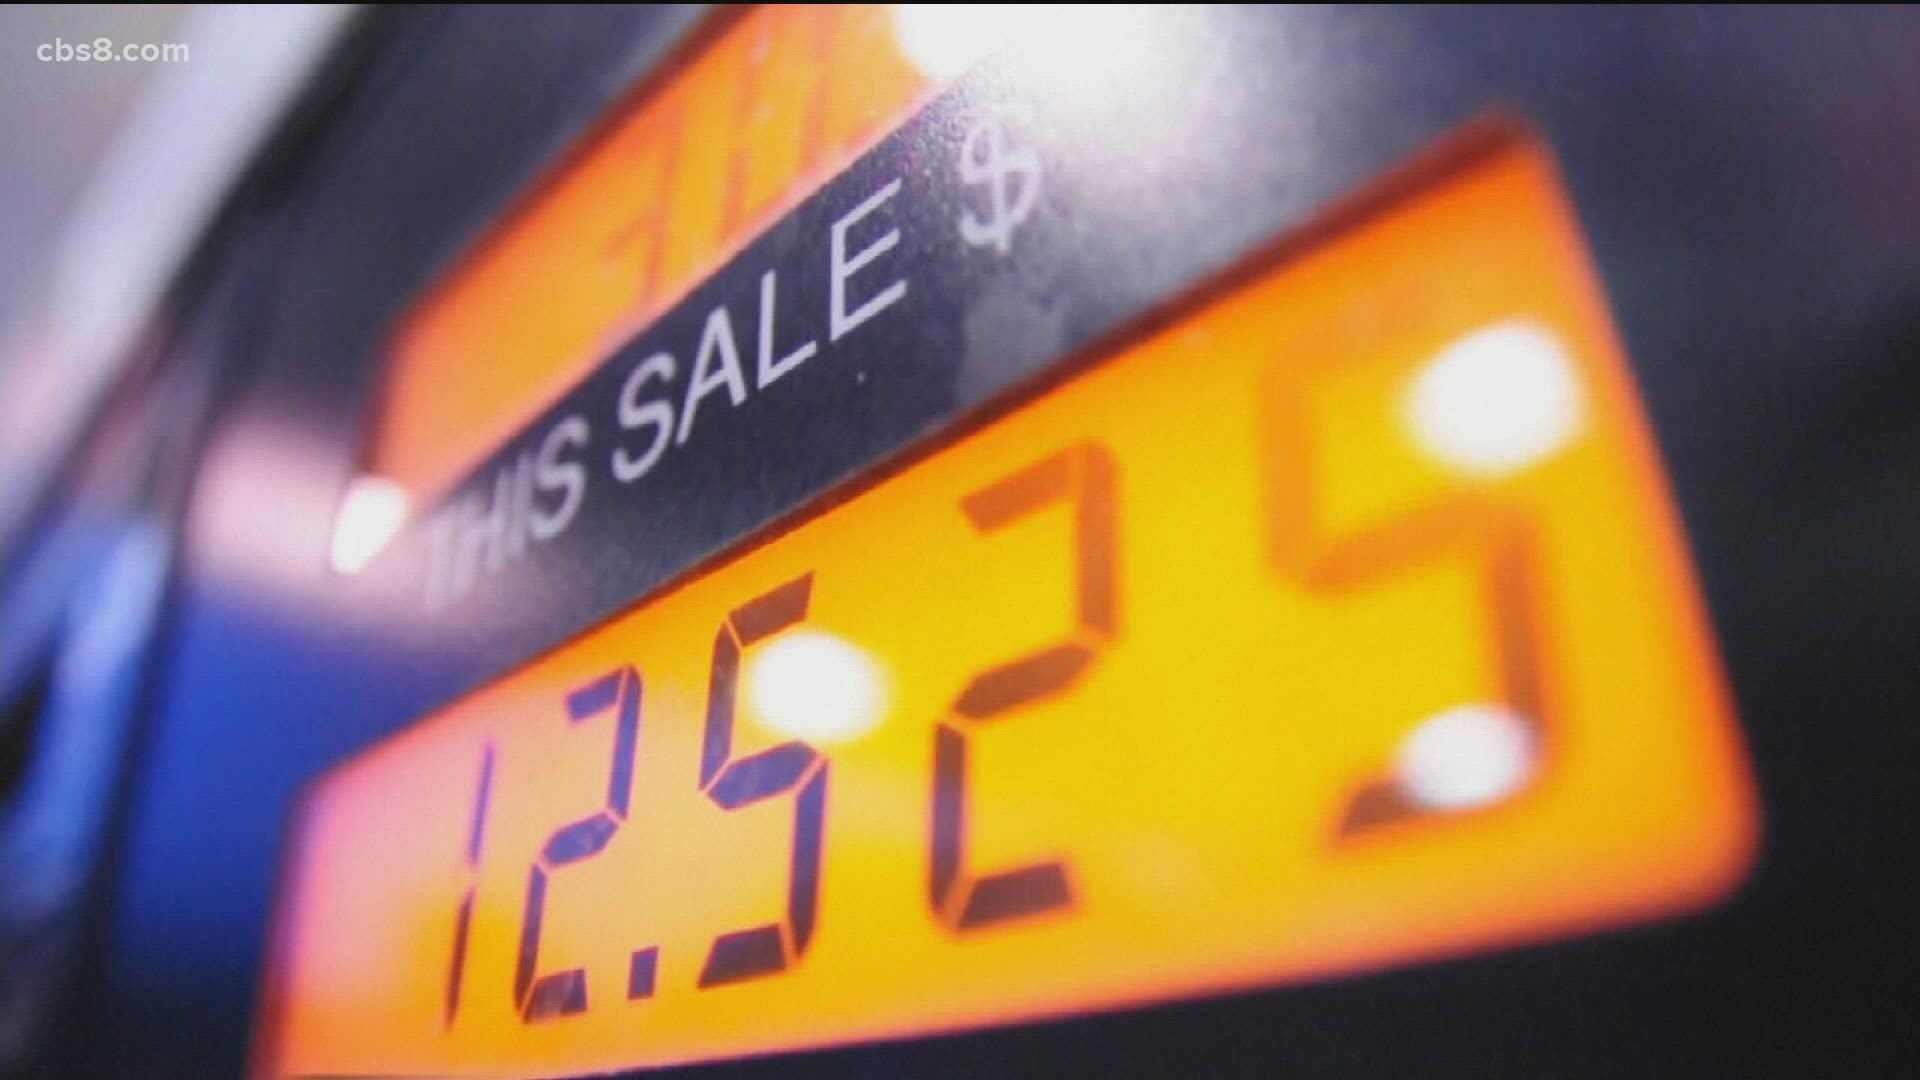 We take a deep dive into the record high gas prices across San Diego County and Southern California.